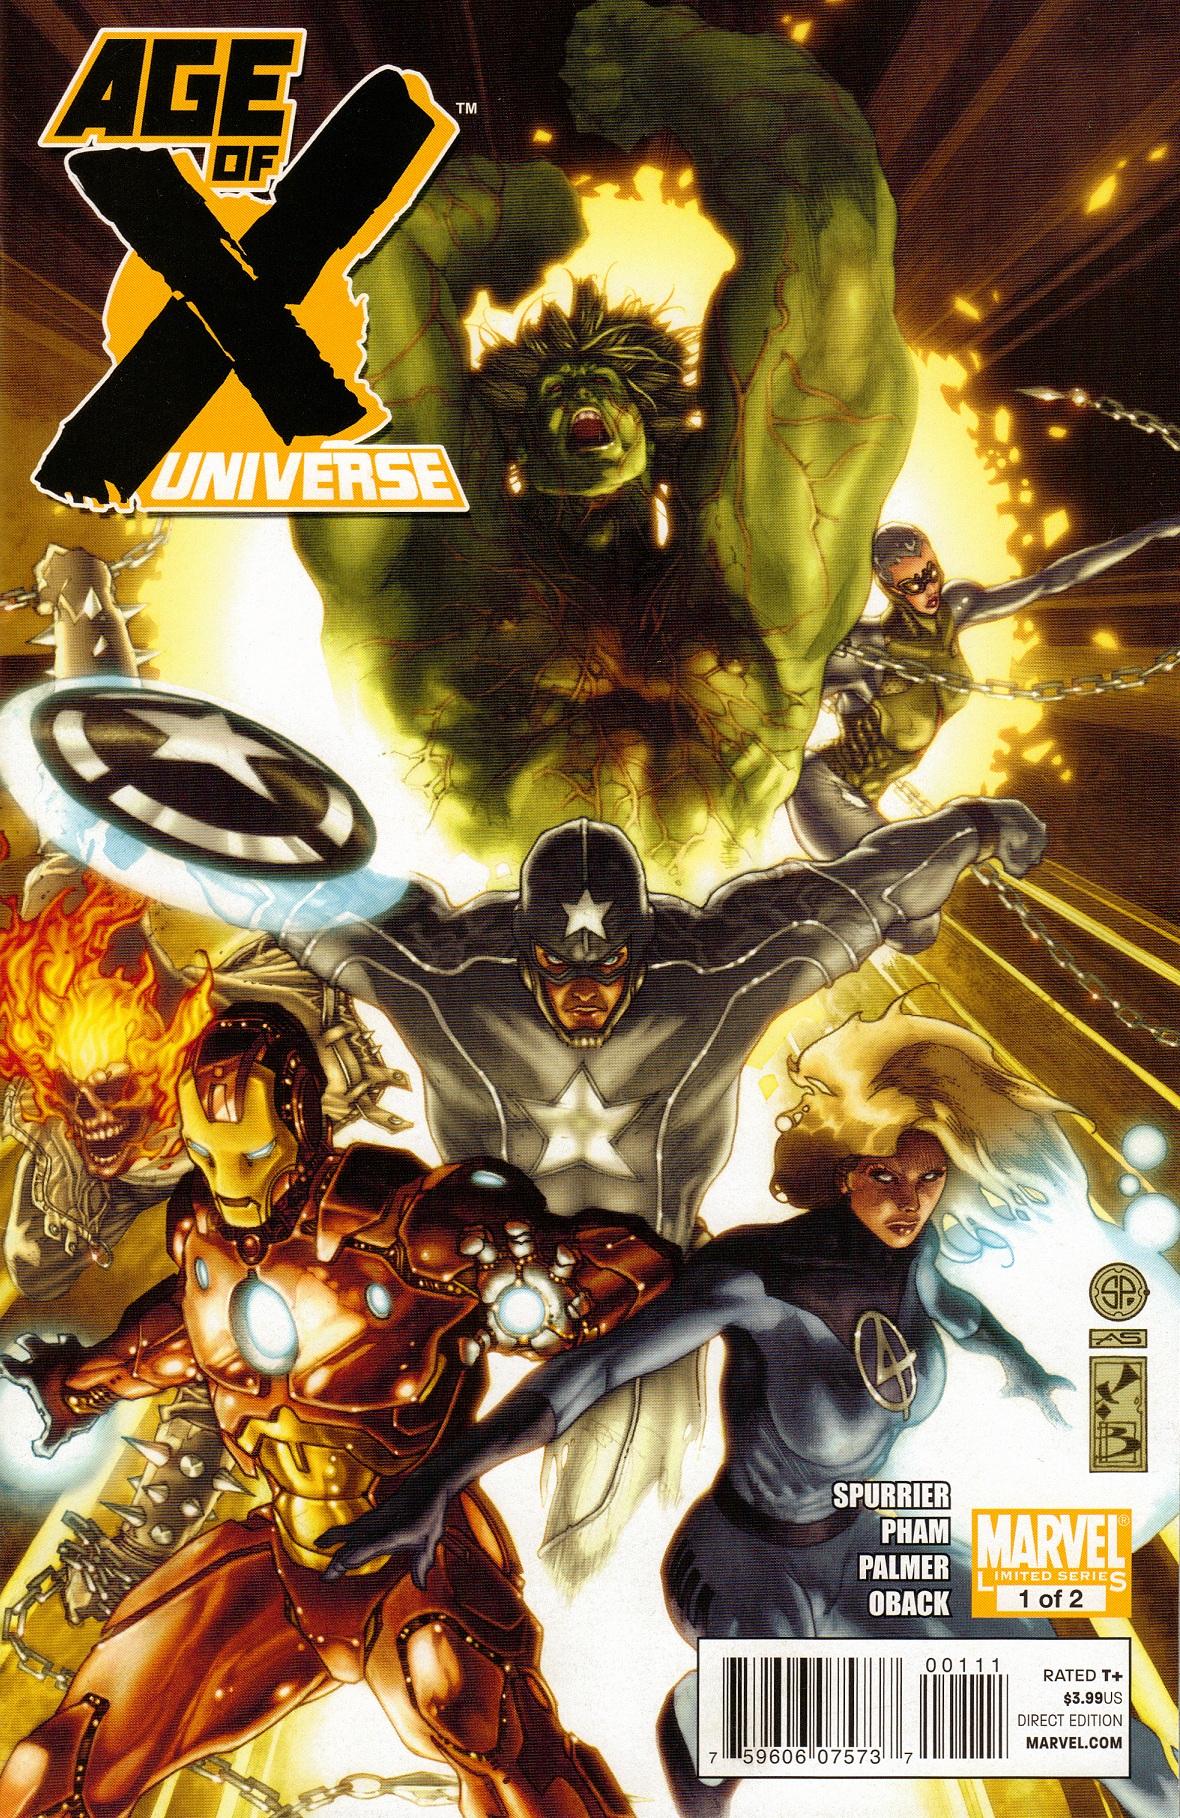 Age Of X: Universe #2